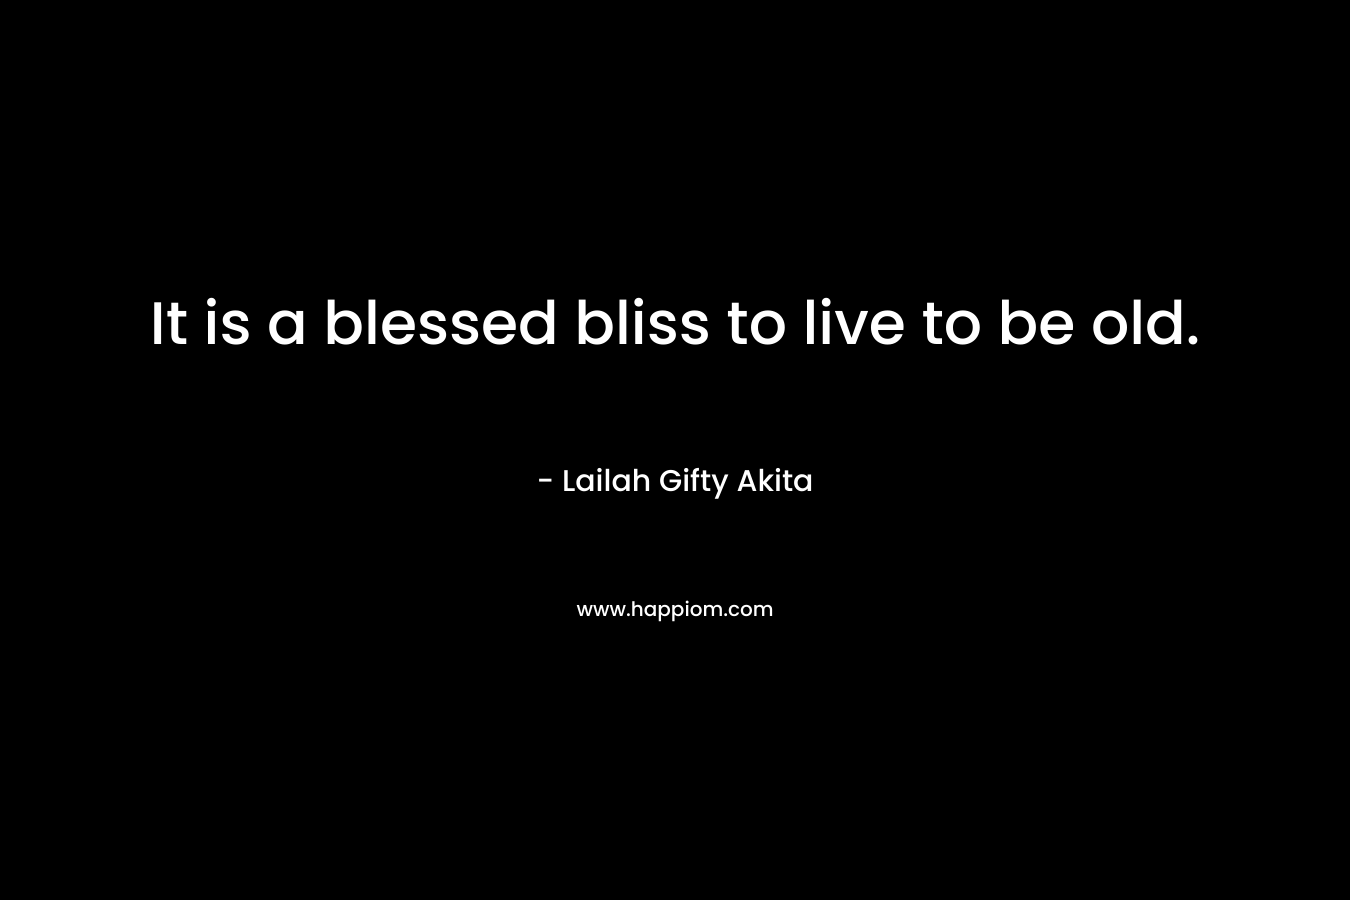 It is a blessed bliss to live to be old.